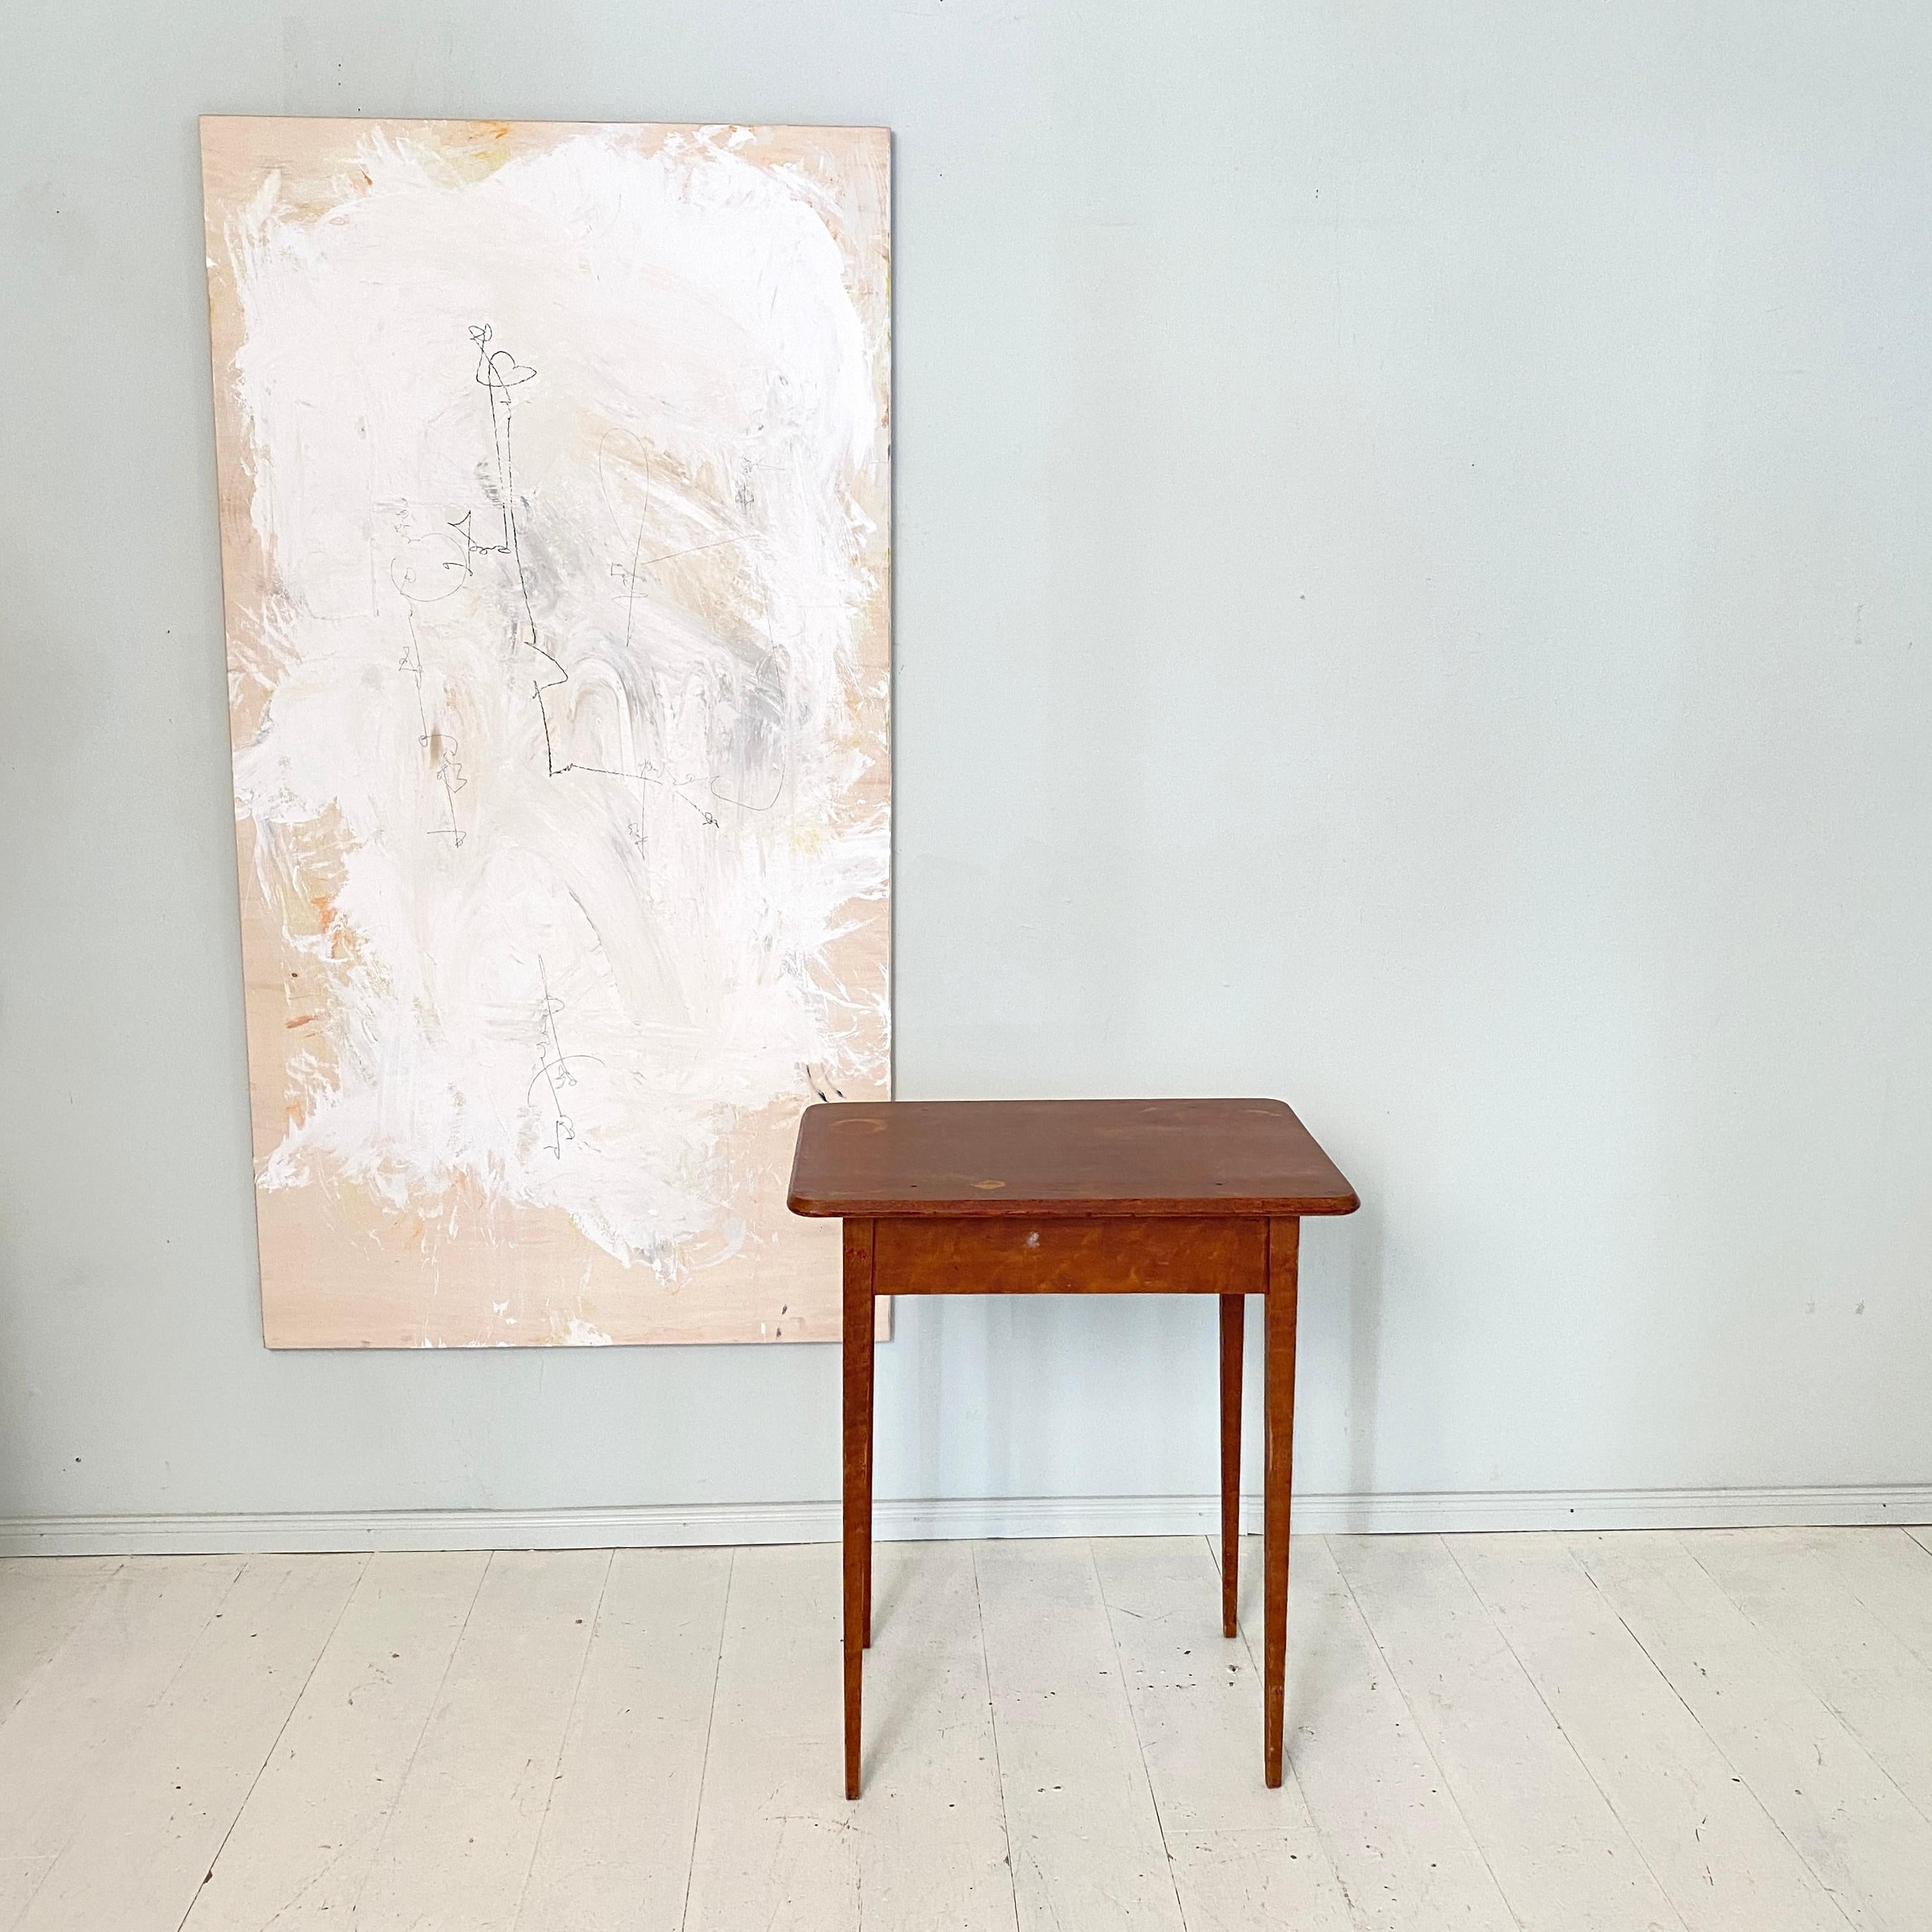 This Gustavian side-table is from the Northern Swedish country side. It was made around 1820 and is in untouched original condition with genuine wear and patina. 
The condition of the table is the authentic result of 200 years of use. 
A unique